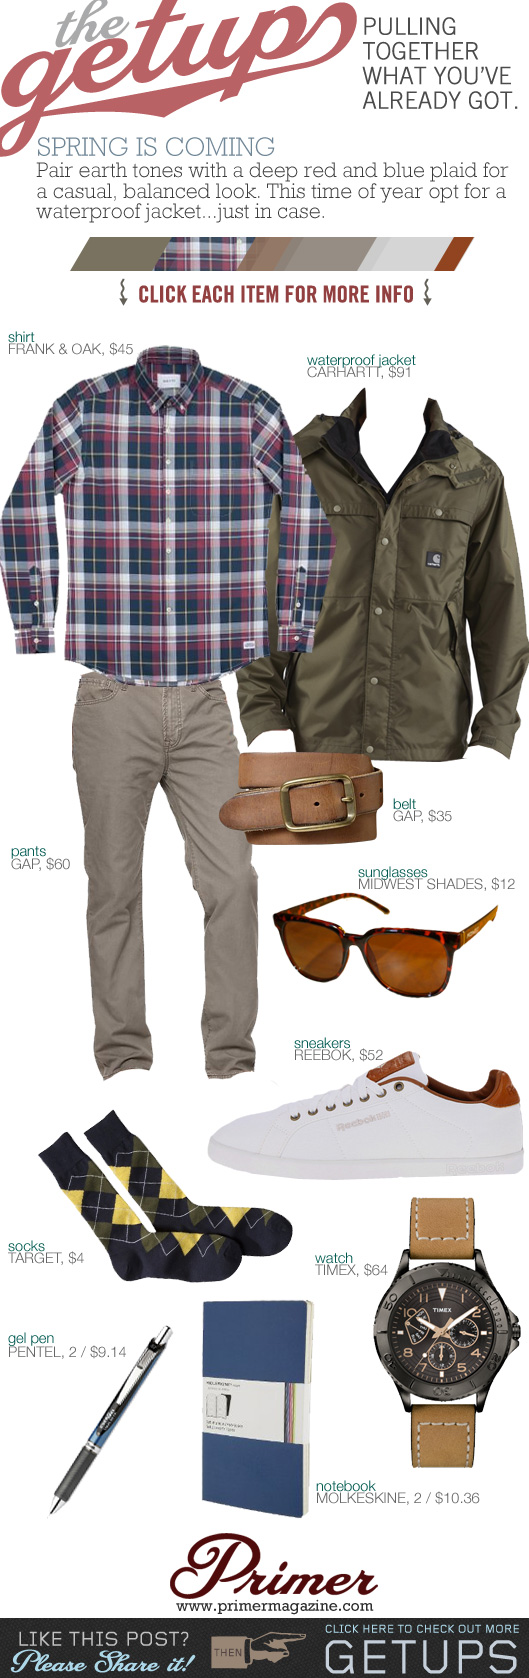 The Getup Spring is Coming - Green jacket, plaid shirt, gray pants, sneakers